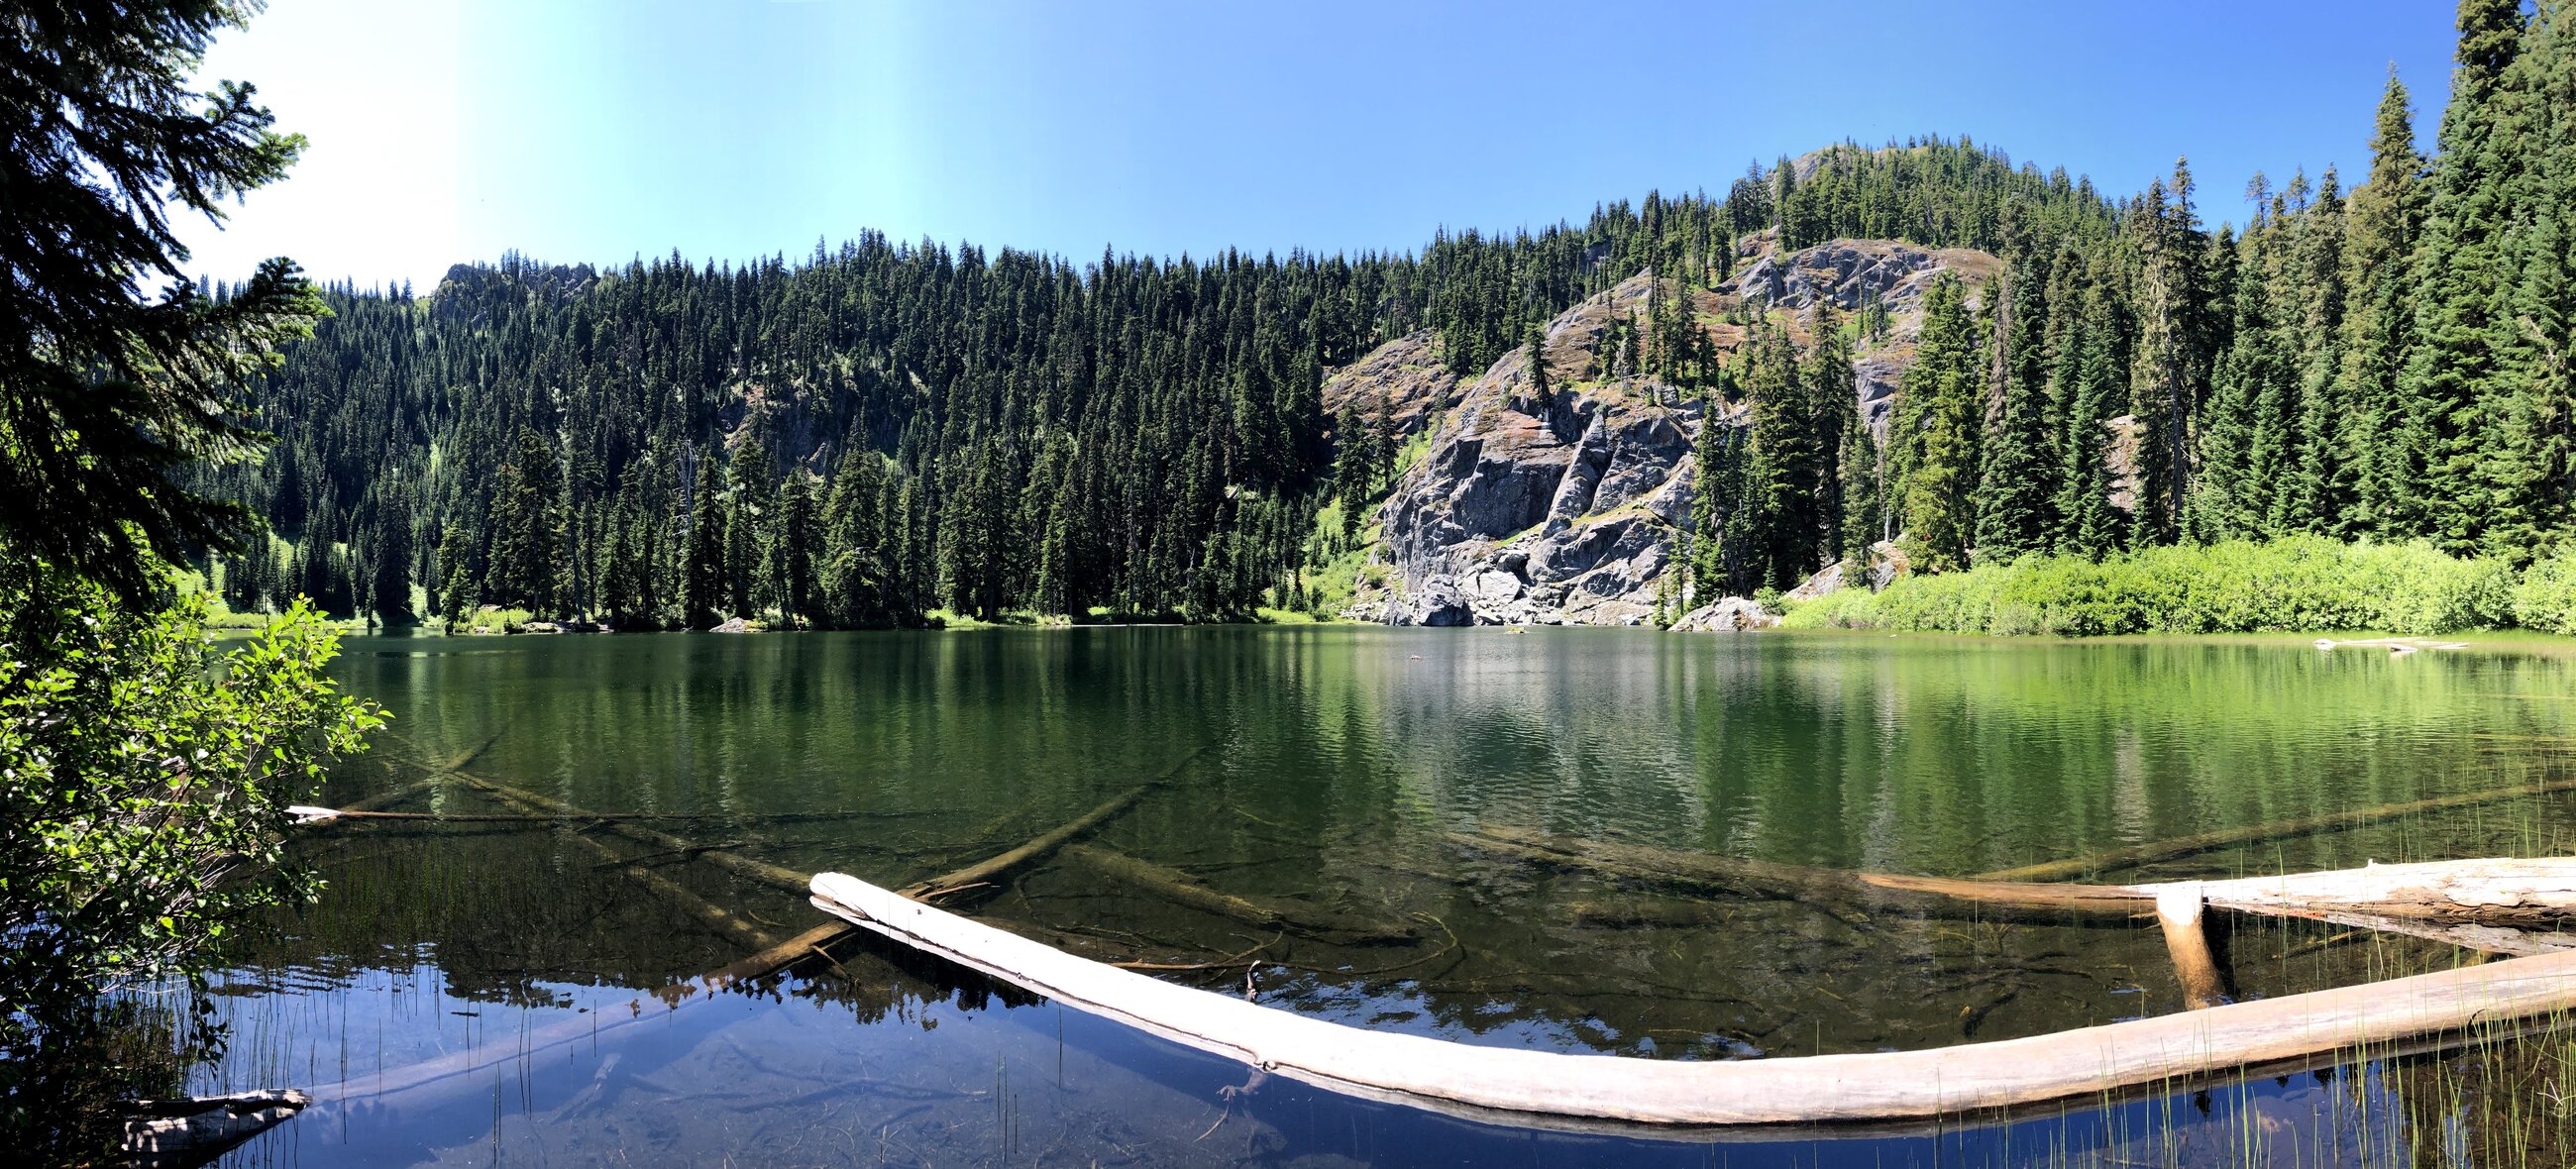 An Alpine lake we swam in!